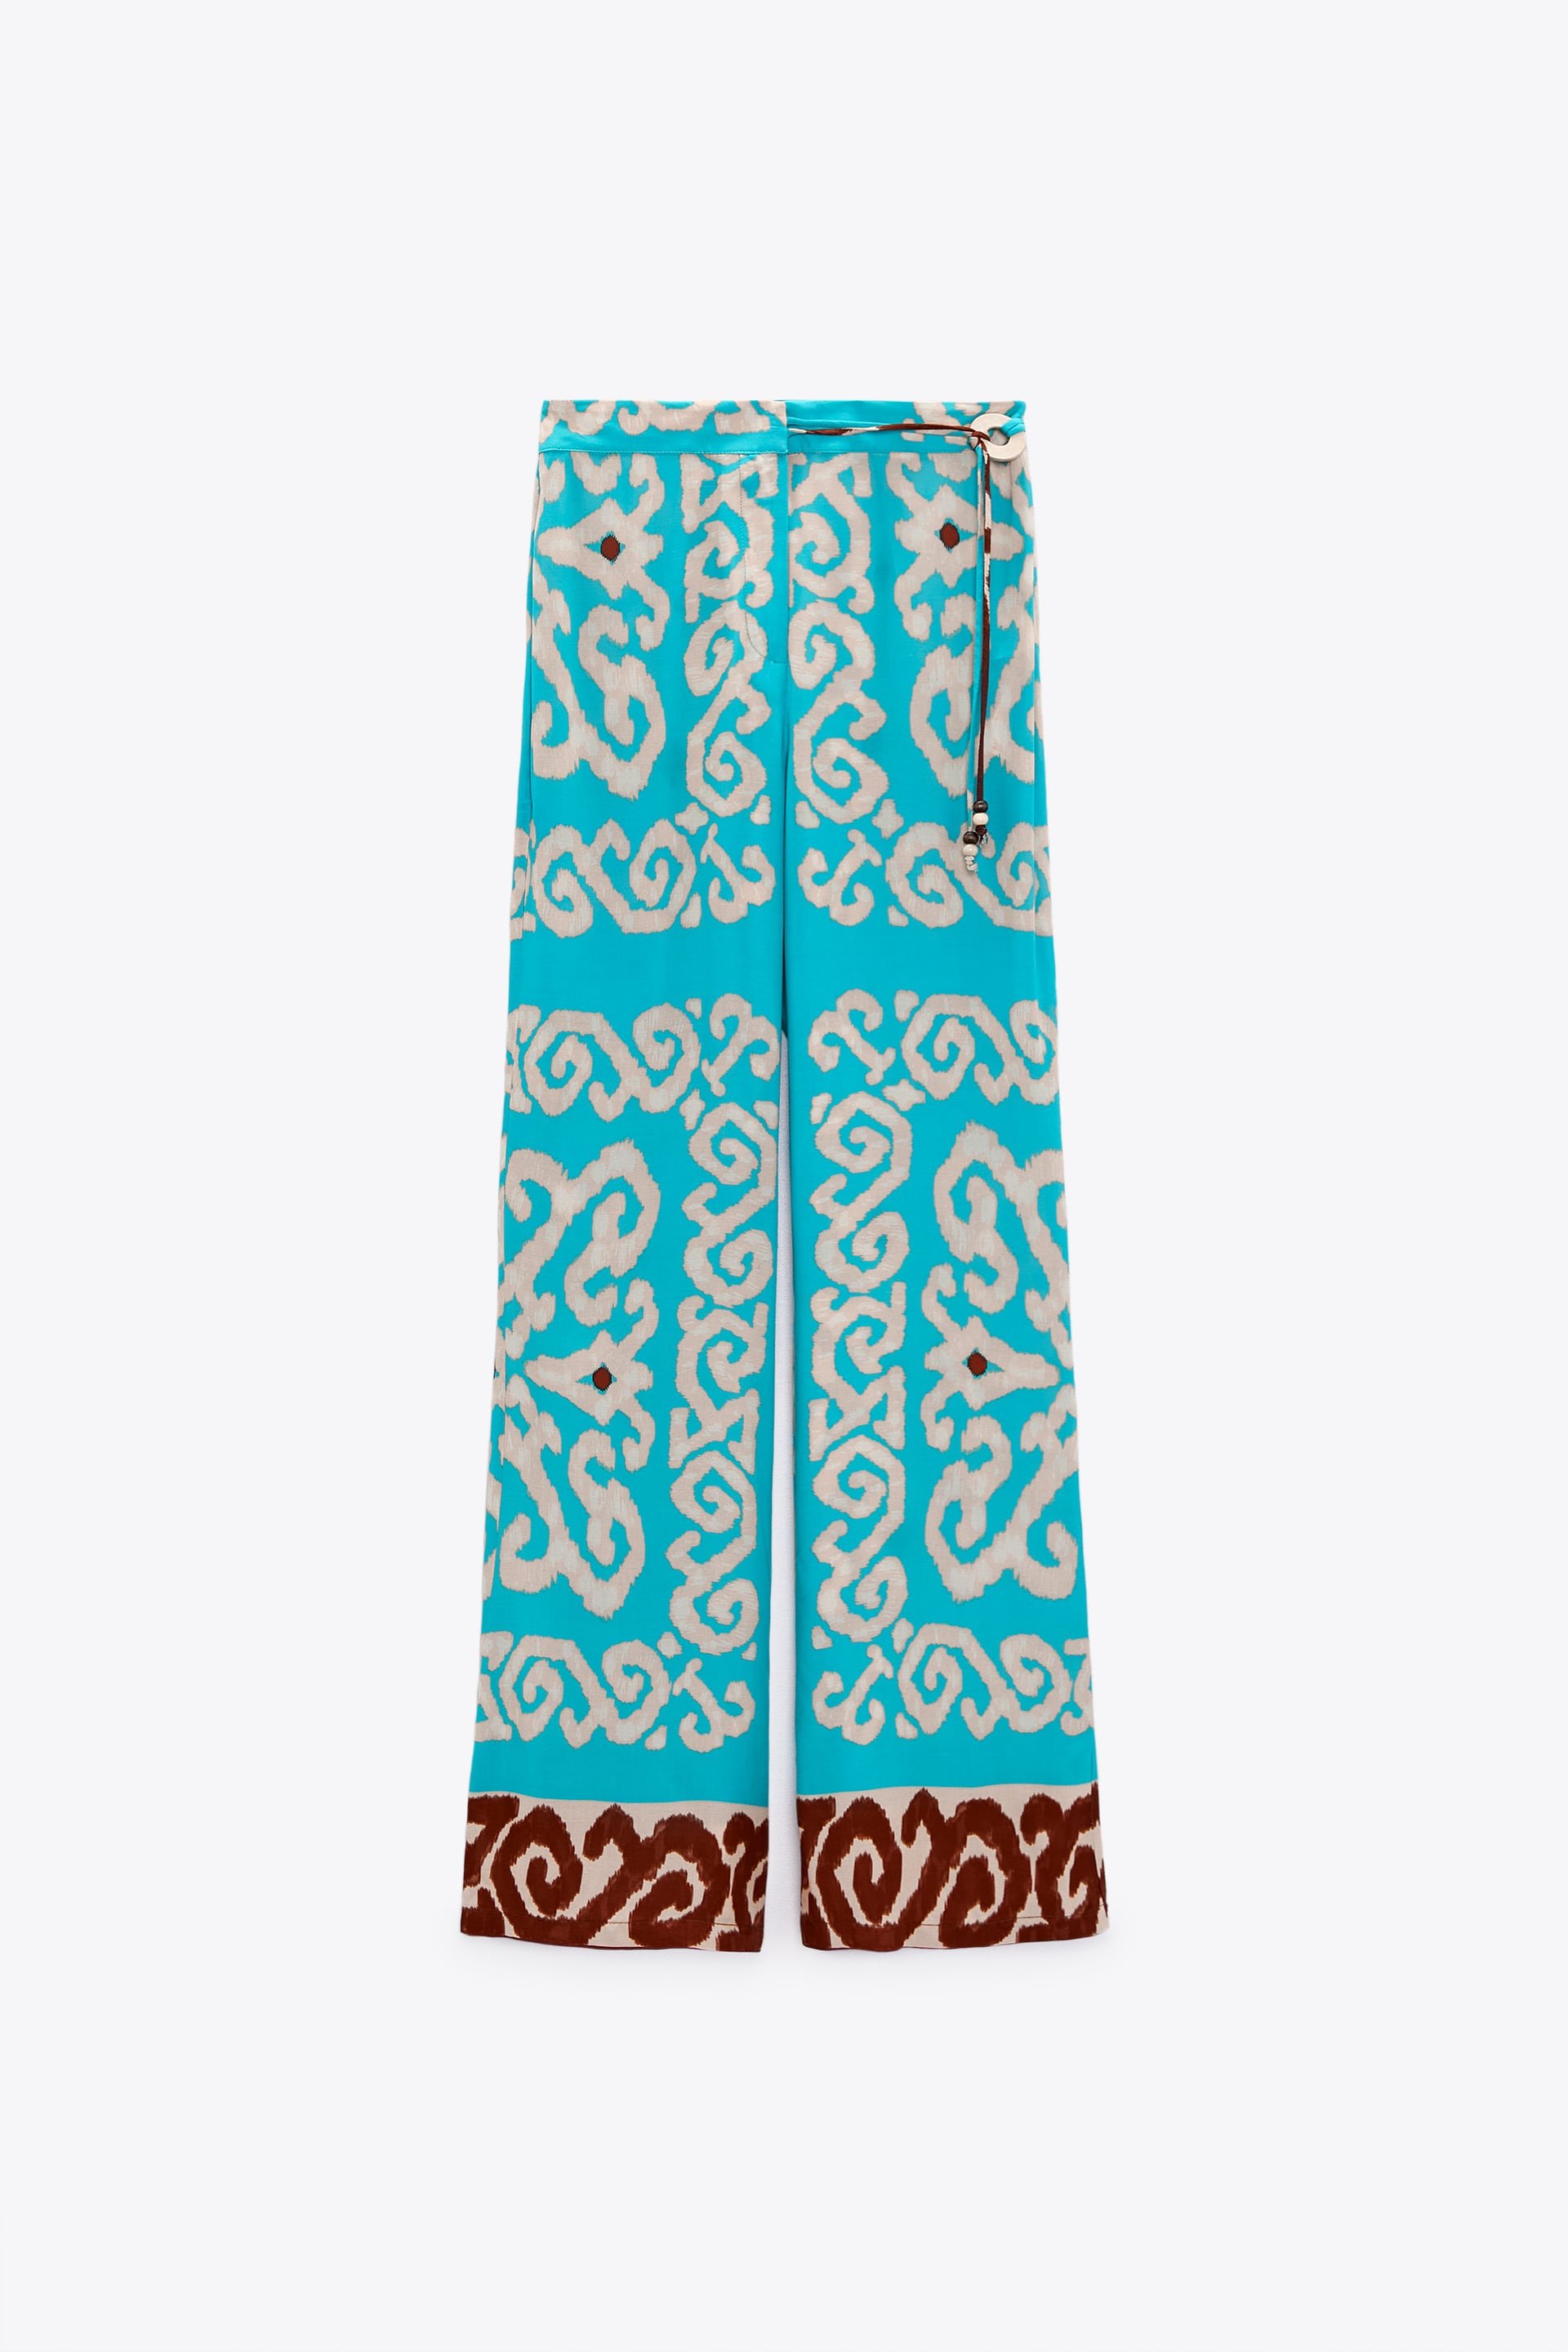 Zara Flowing Trousers with a Full-Length Print.jpg